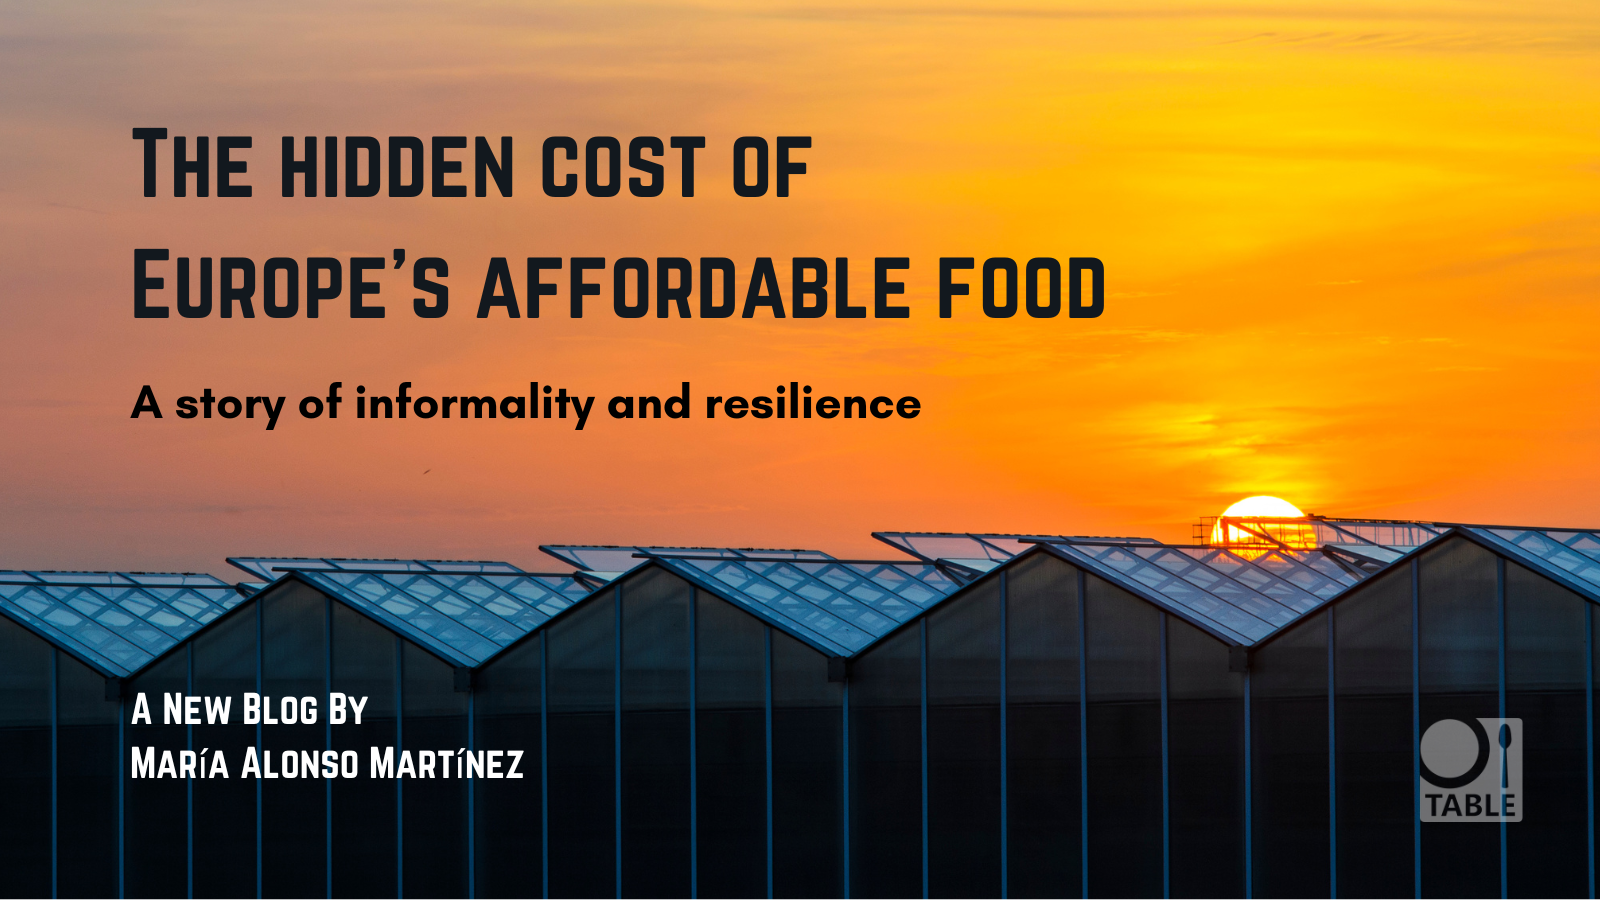 image of greenhouses in sunset, with text 'the hidden cost of Europe's affordable food'